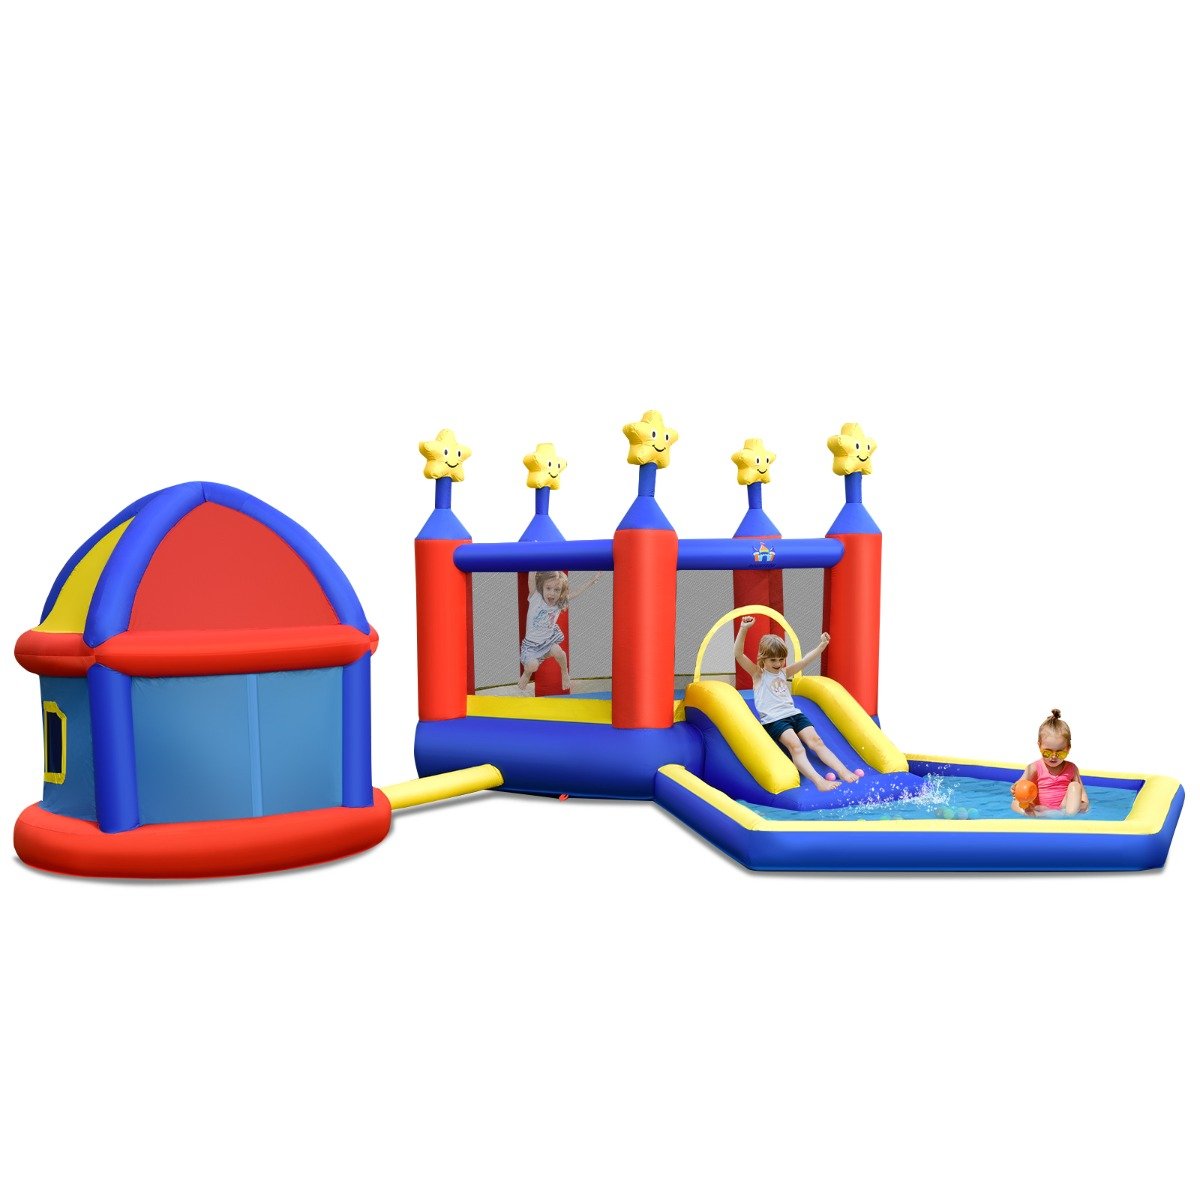 Kids Inflatable Bouncy House with Dual Basketball Hoops - Active Playtime